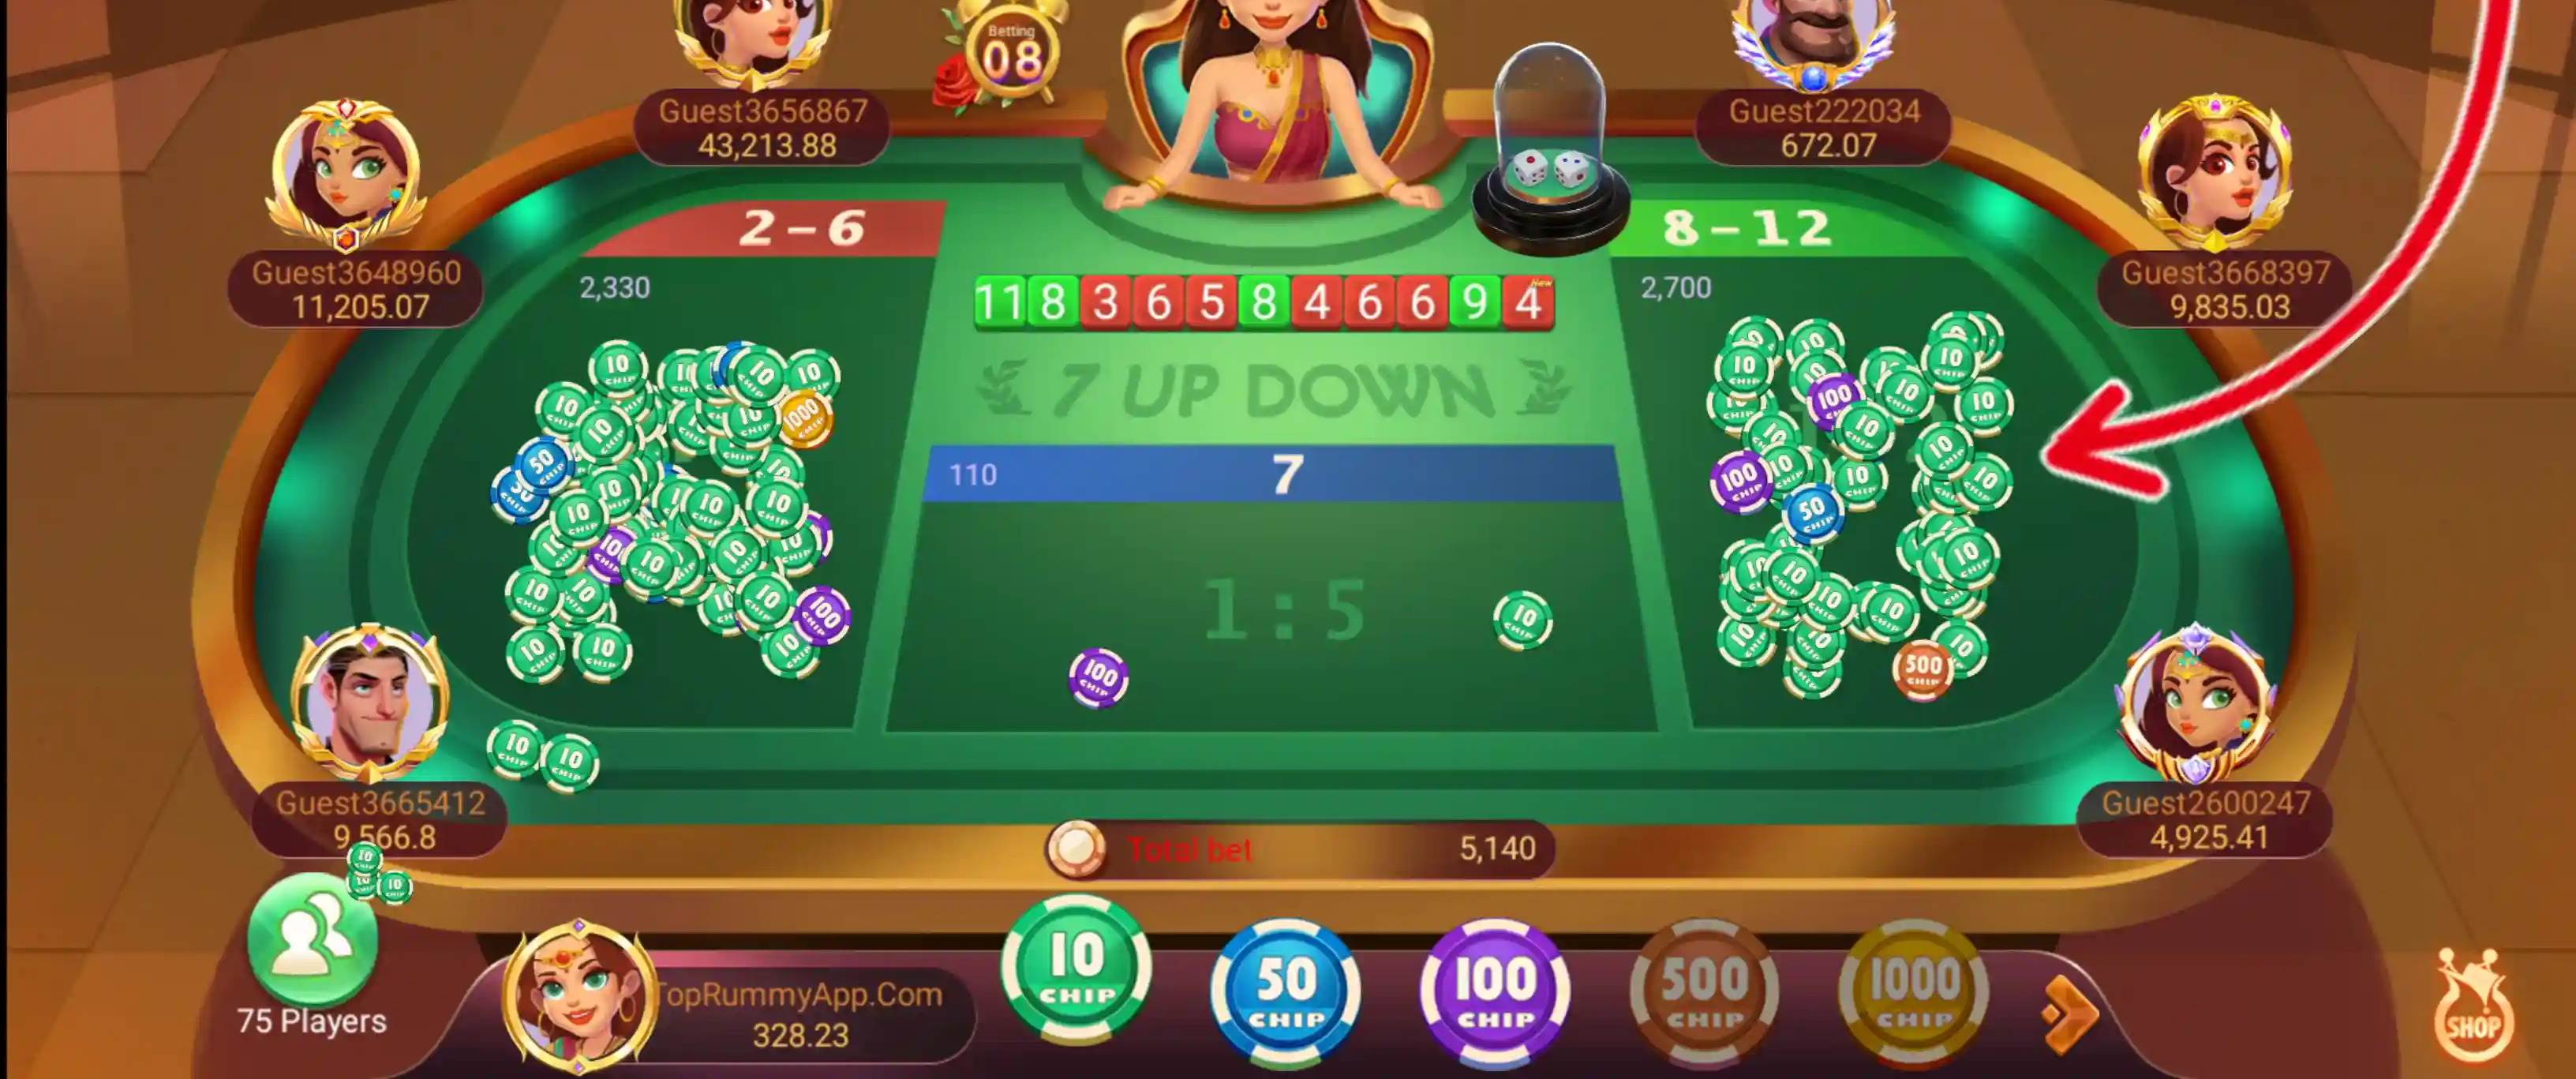 7 Up Down Games Play Top Rummy App